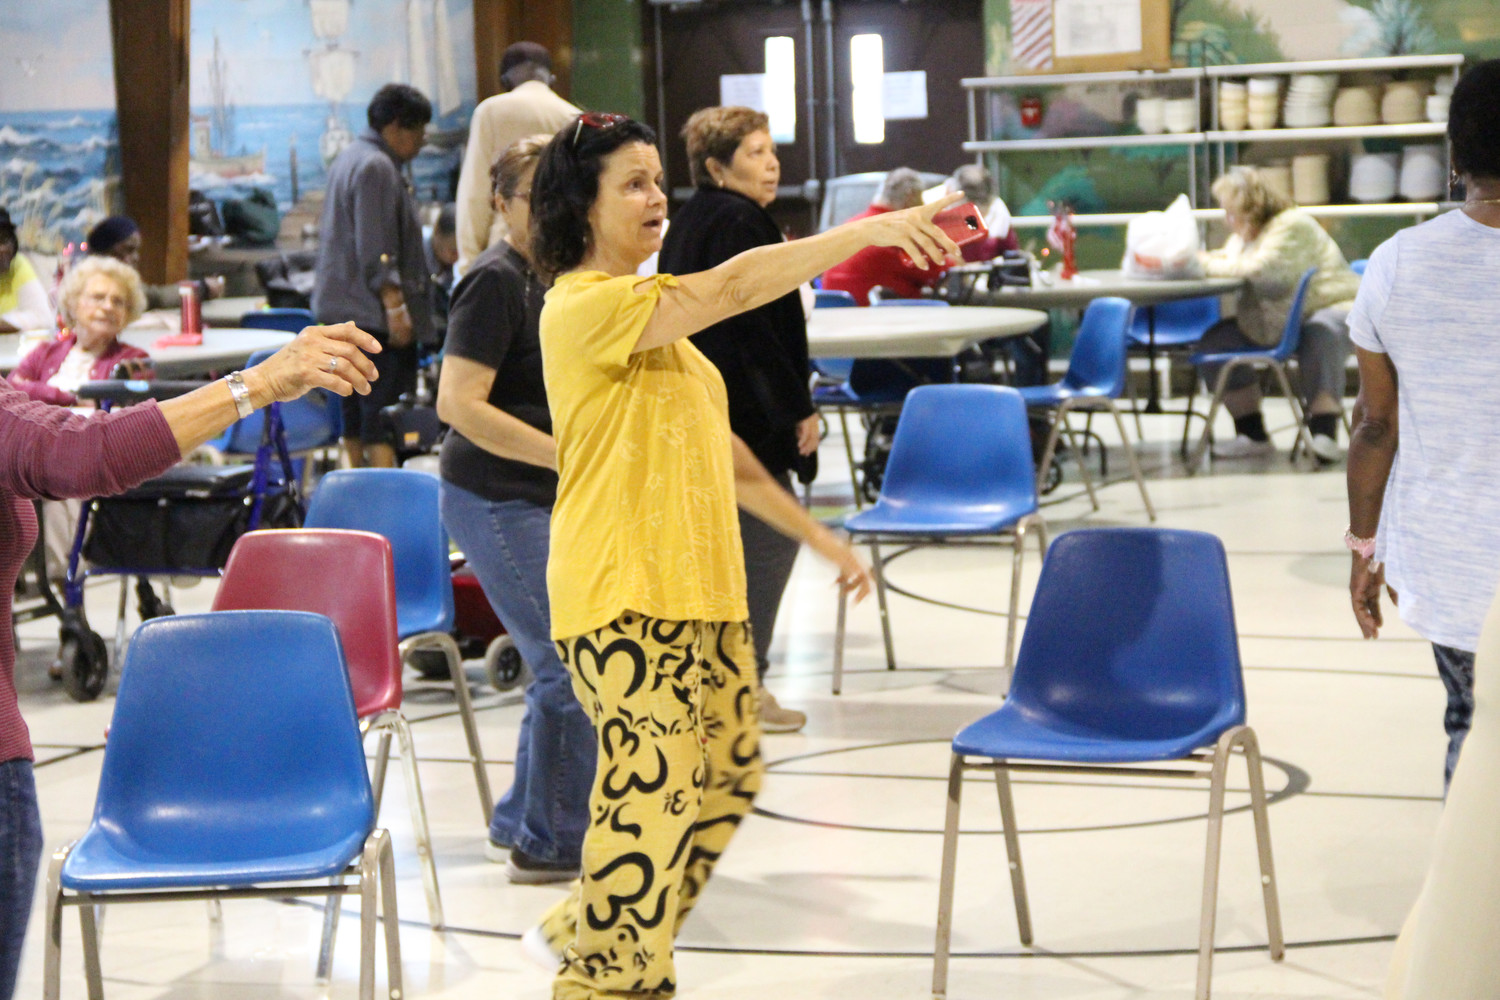 Certified Yoga Instructor Anne Moffatt, 56, showed the exercise class how to do the dance steps at the senior center off Church Street in Freeport.